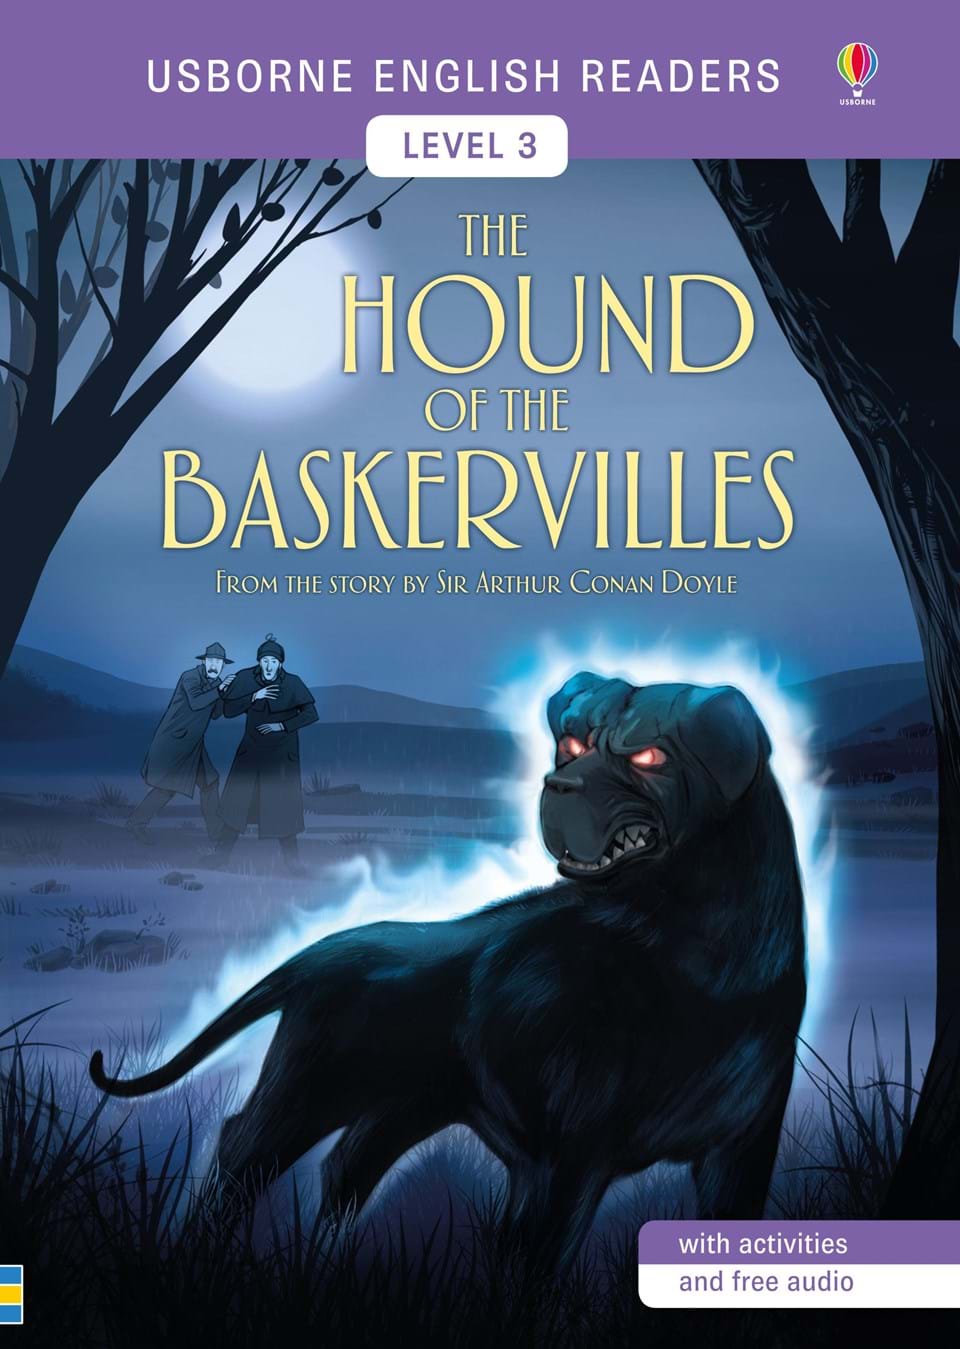 UER 3 Hound of the Baskervilles, The